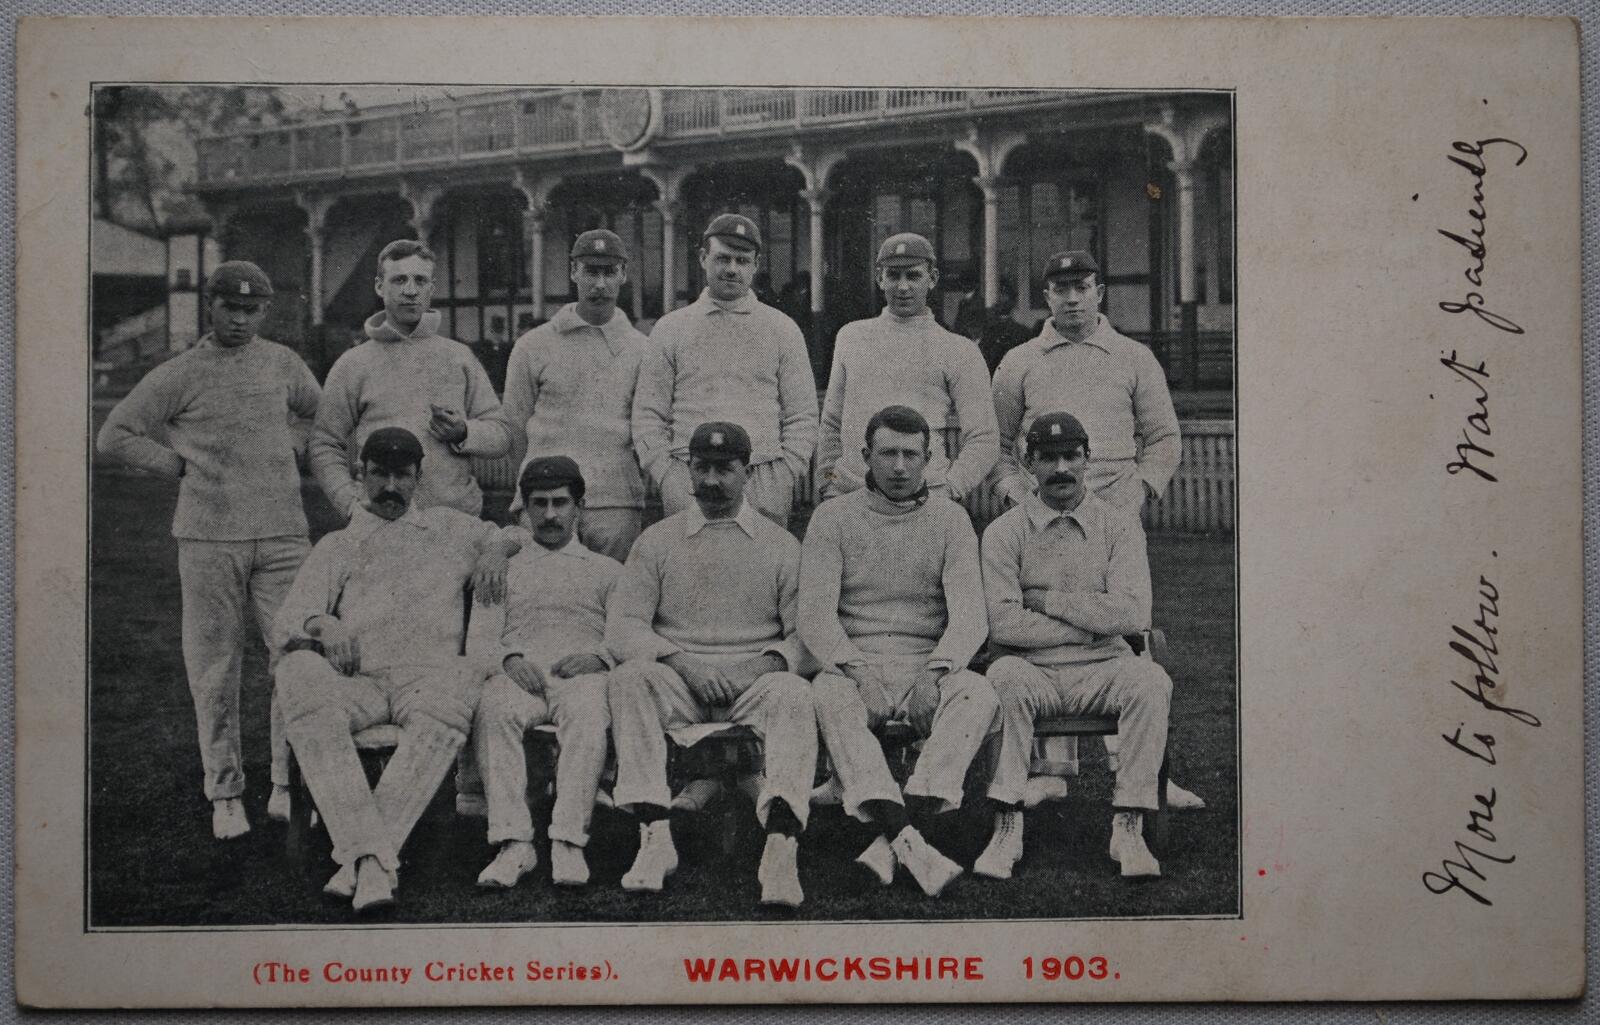 ?Warwickshire 1903?. Mono printed postcard of the team, standing and seated in rows. Title to lower